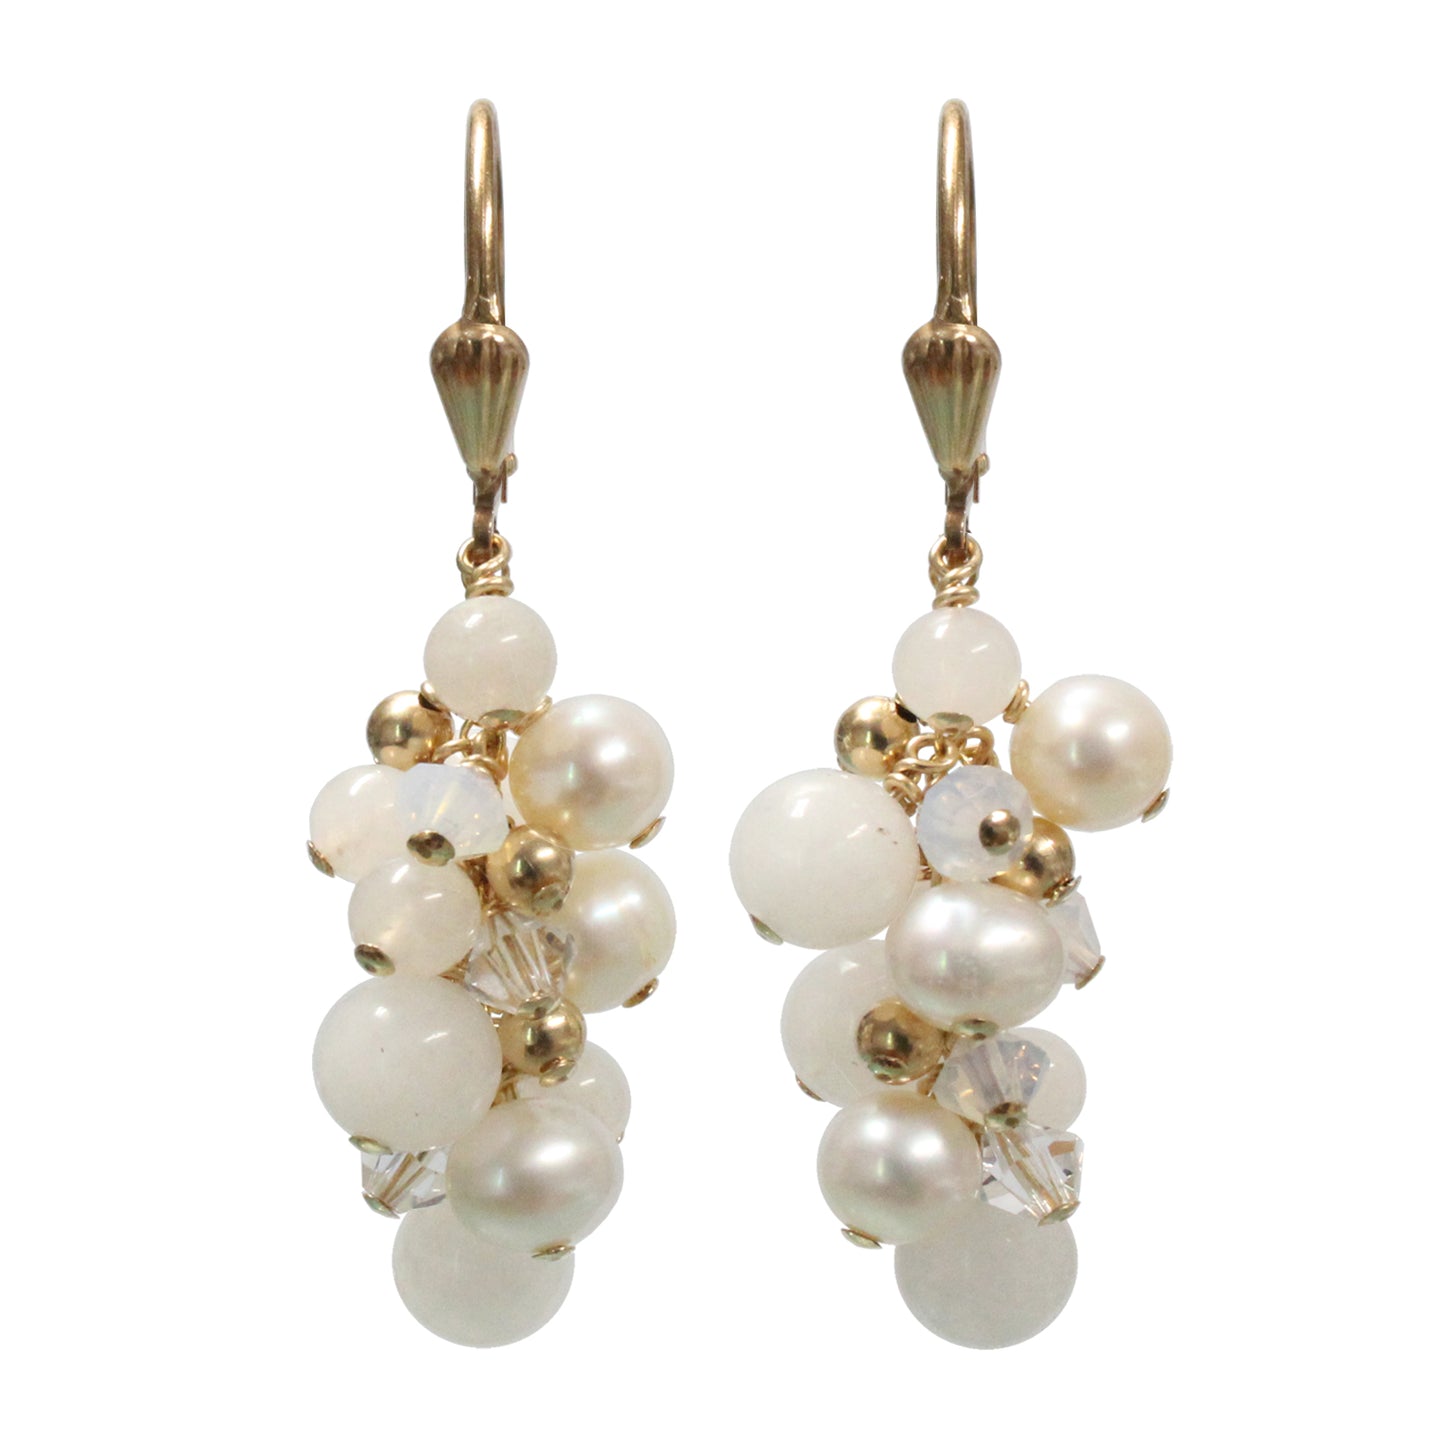 White Cascade Earrings / 48mm length / snow jade, pearls and crystal, gold filled leverback earwires